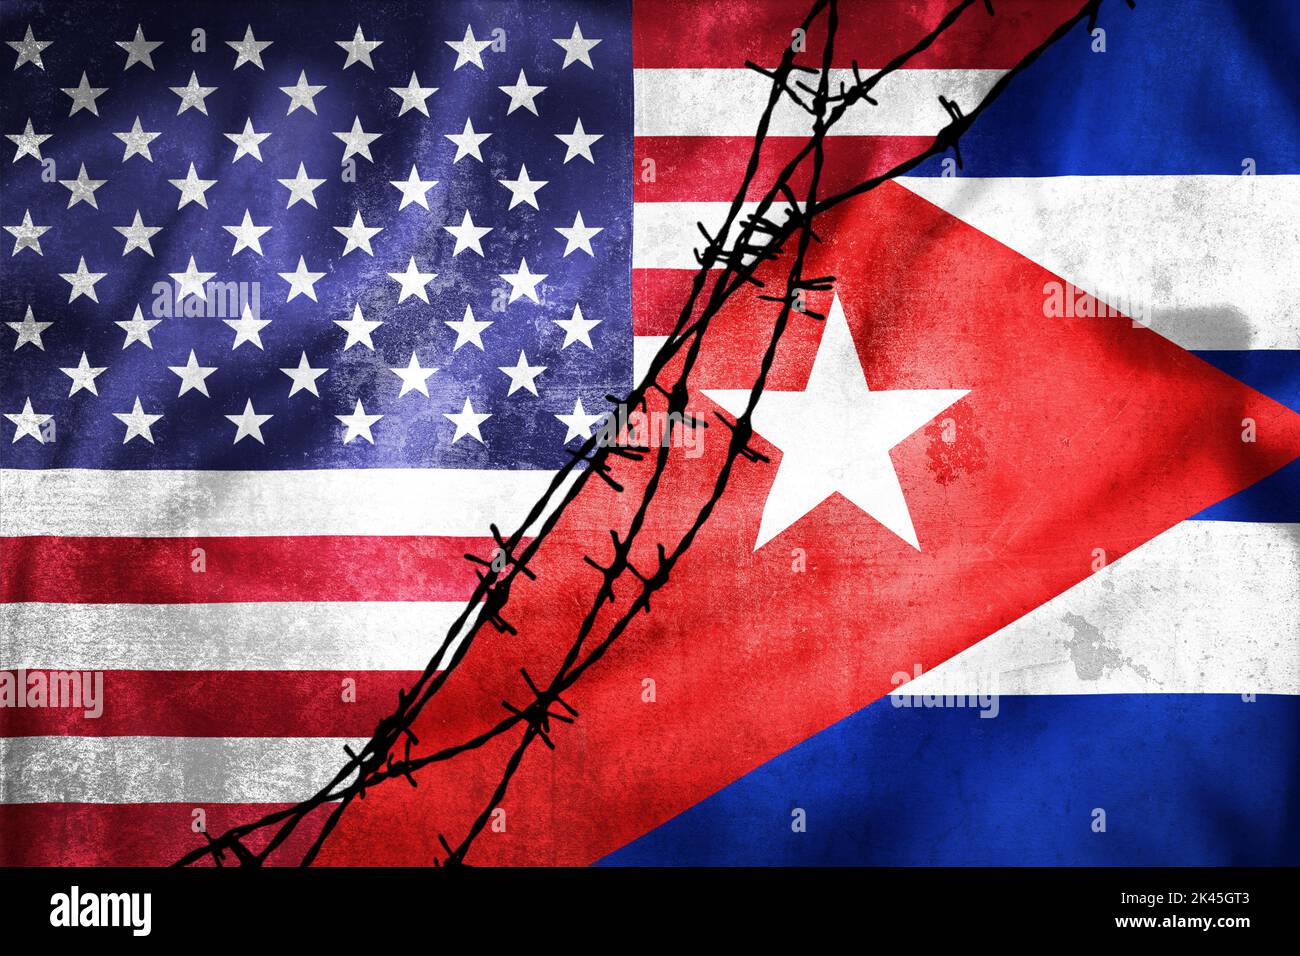 Grunge flags of USA and Cuba divided by barb wire illustration, concept of tense relations between USA and Cuba Stock Photo